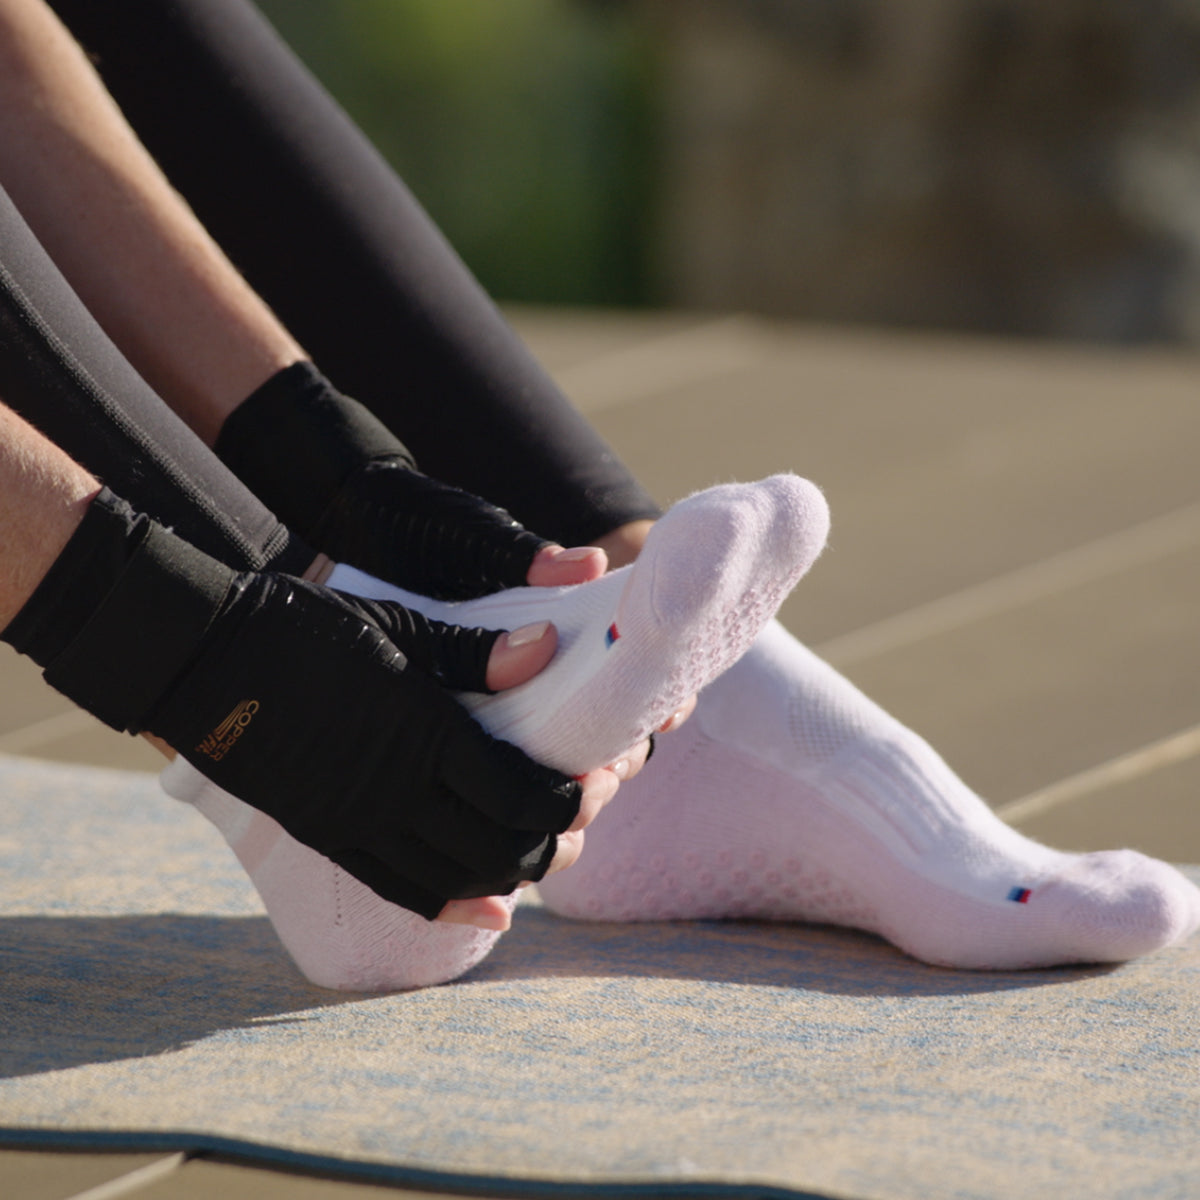 Buy New Cushioned Energy Gripper Socks at Copper Fit USA®